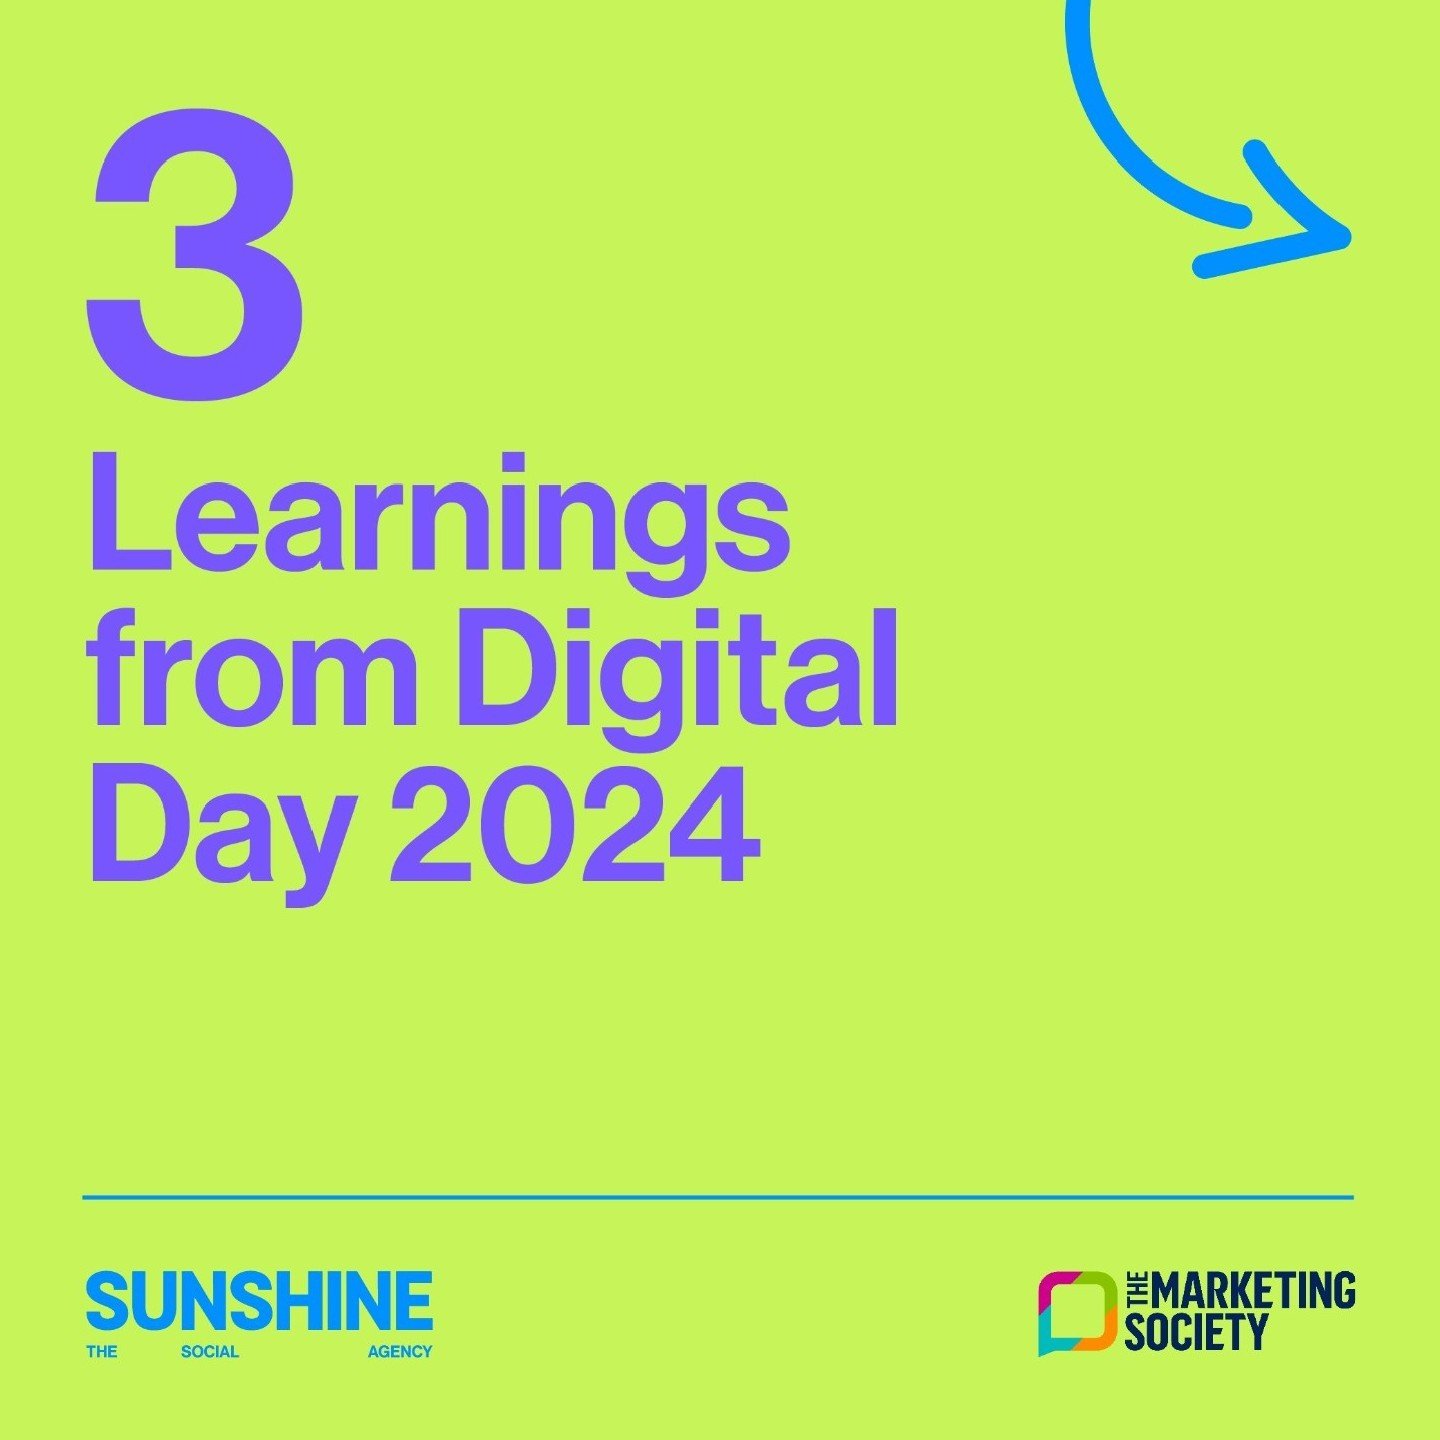 Last week our Strategy team attended @marketingsocsco Digital Day 2024. 

The day was packed with thoughtful conversations, inspiring ideas and the opportunity to connect with people across the industry. Take a peek at some of our top insights below 